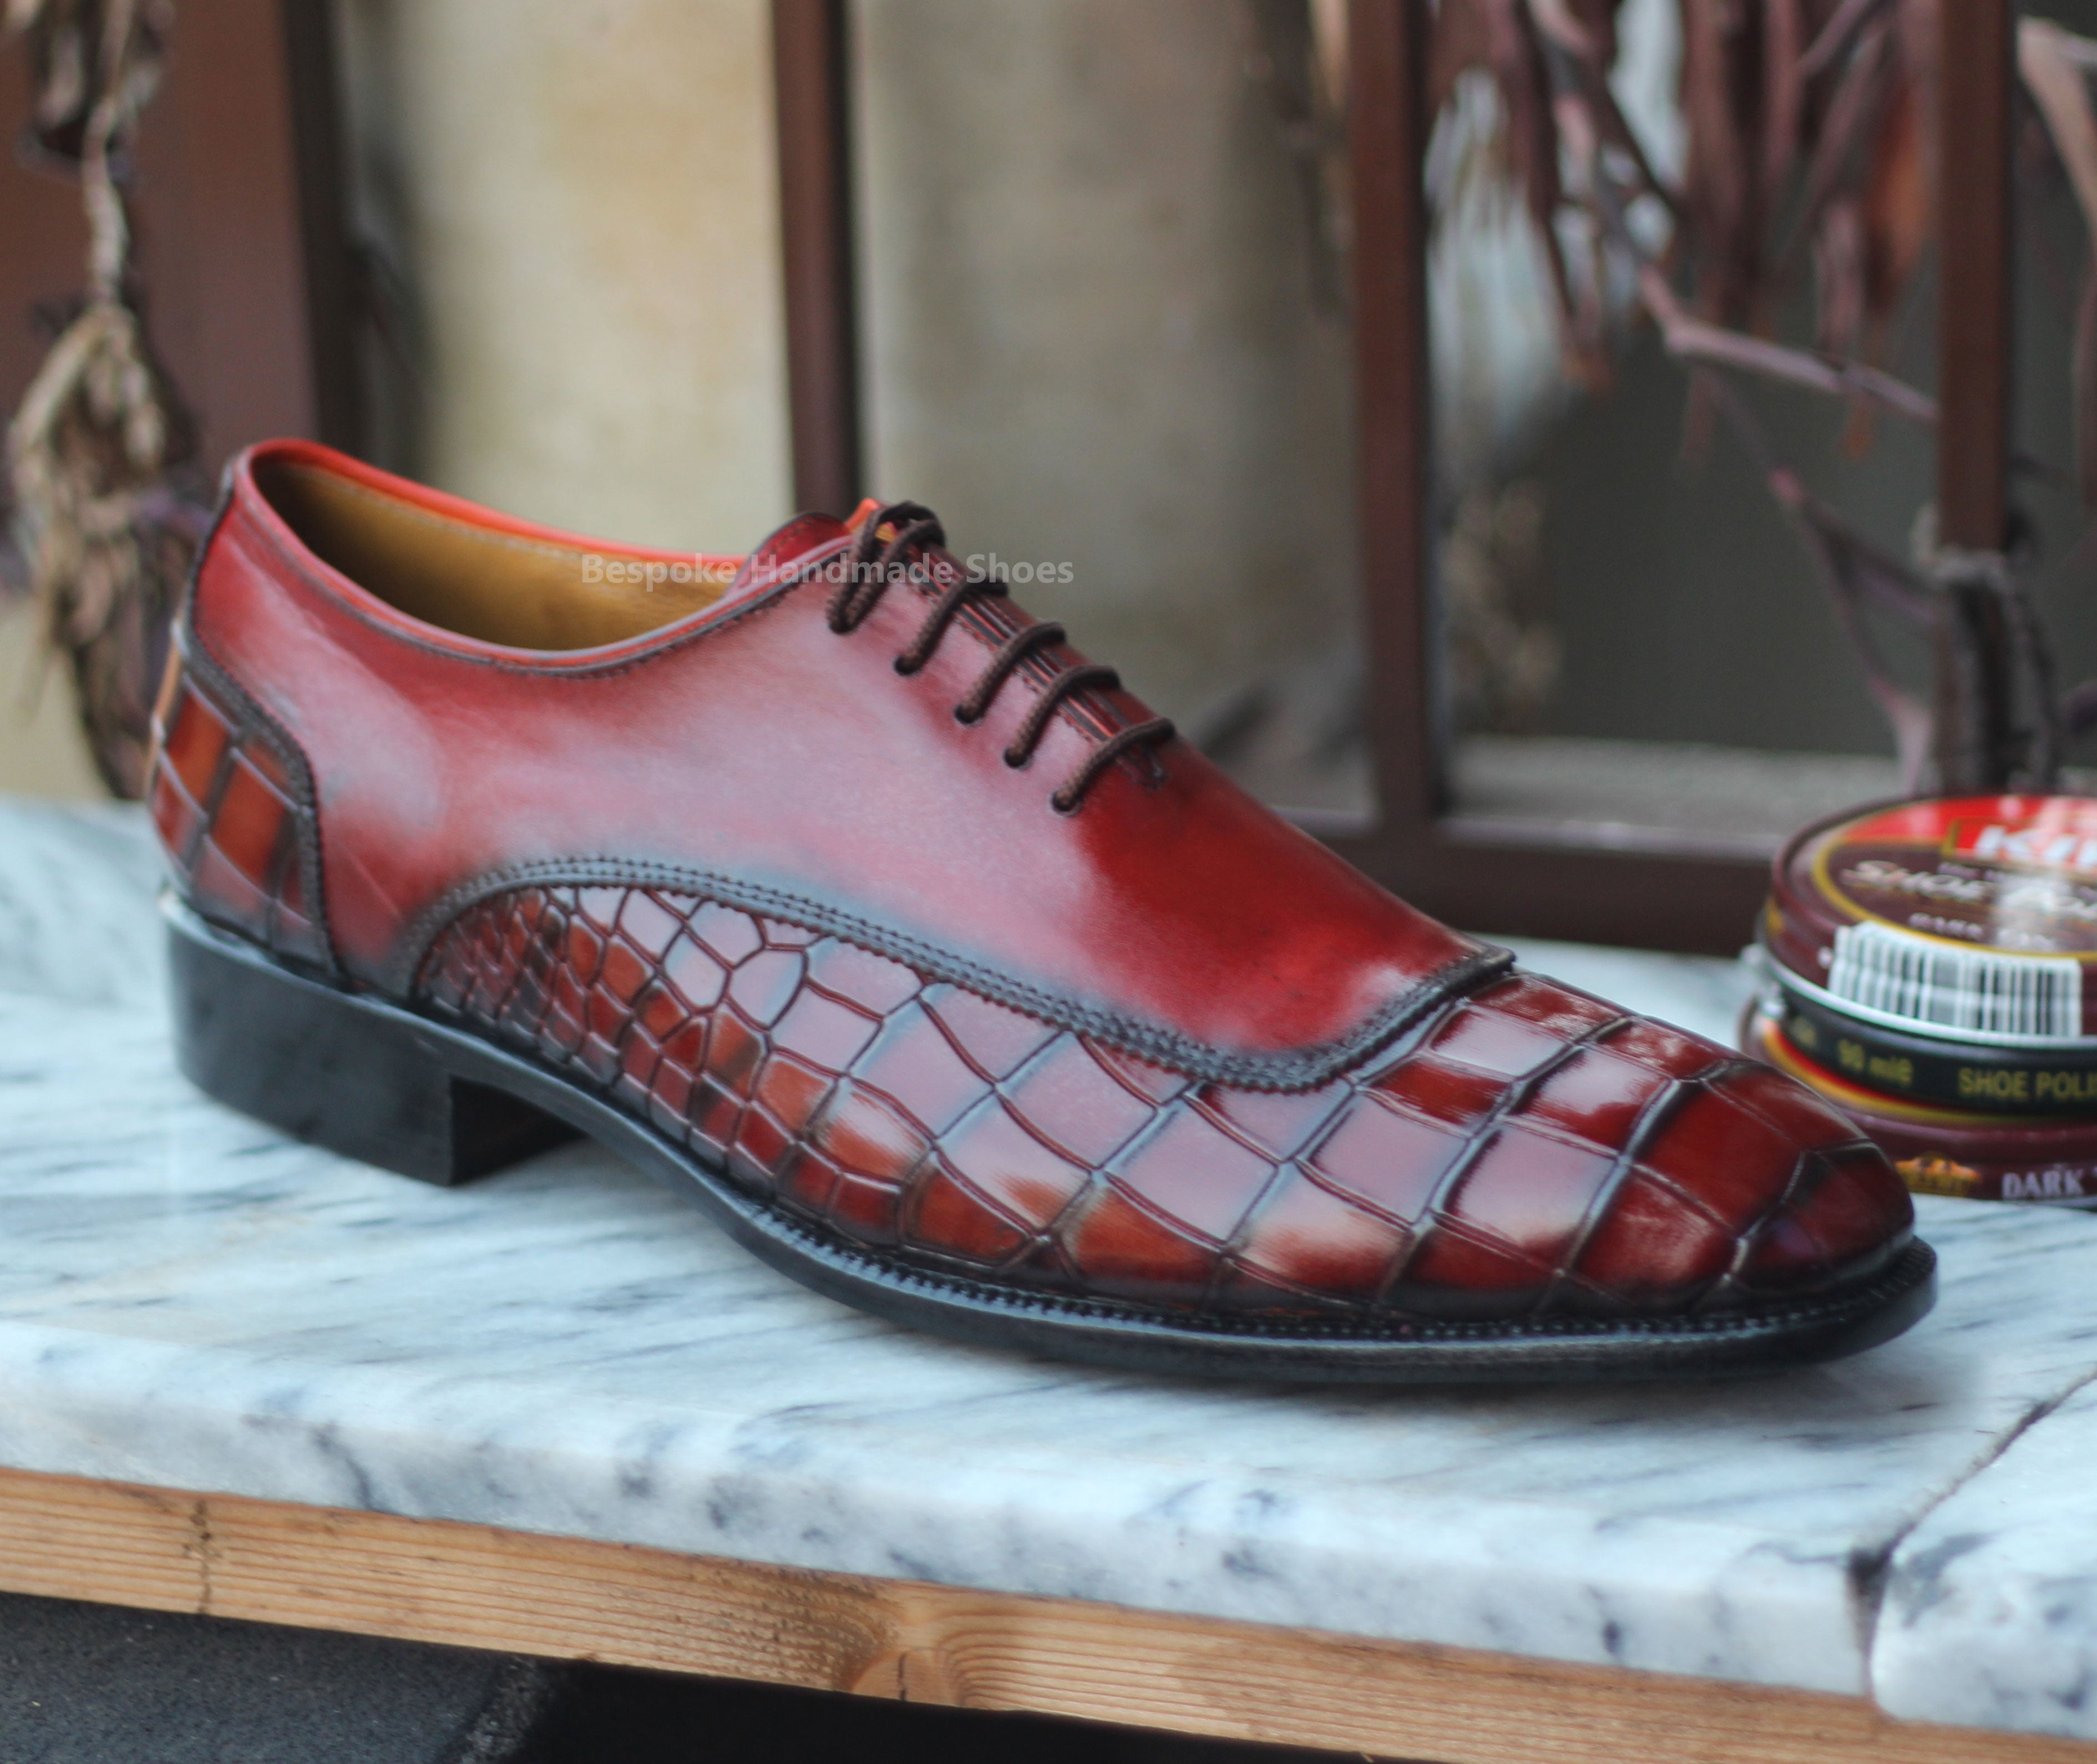 Custom Made Men's New Handmade Red Crocodile Leather Oxford Lace Up Dress Shoes